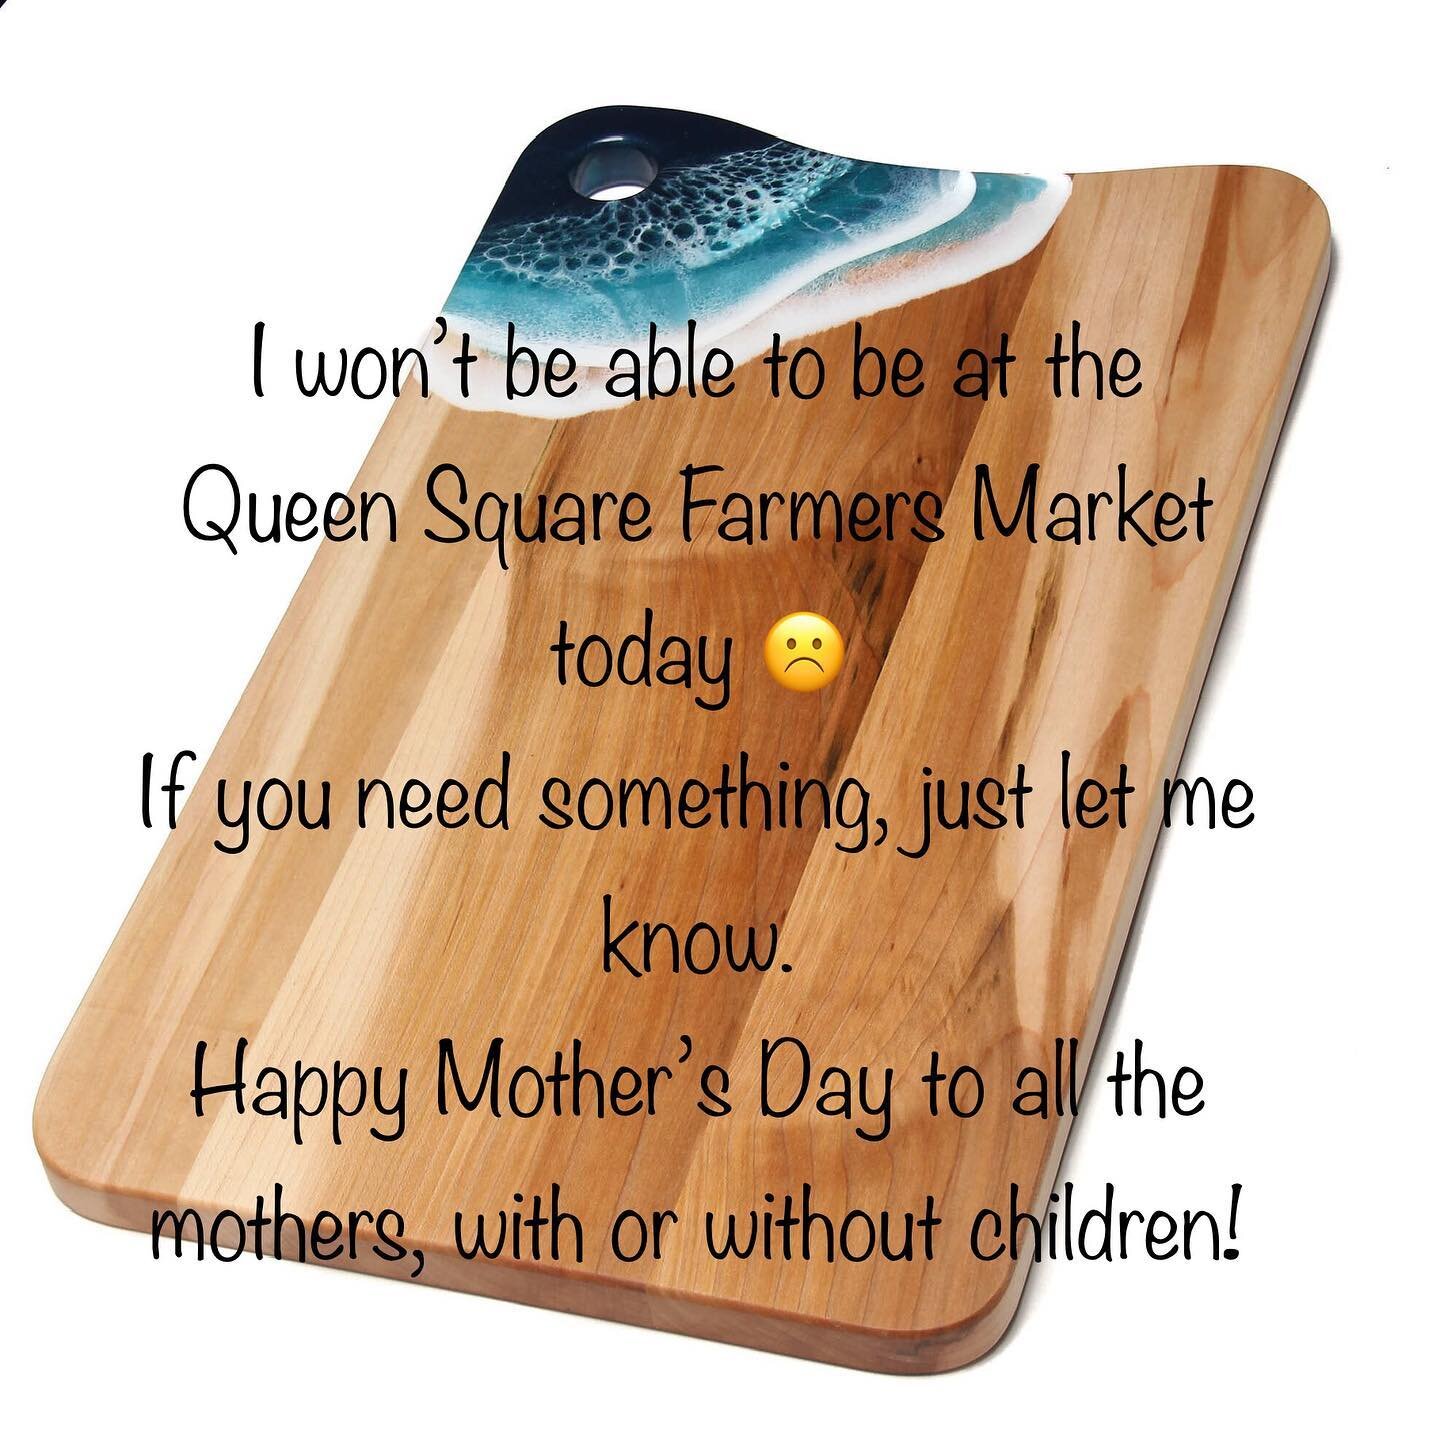 Sad to have to cancel the first Queens Square Market of the season. Hope everyone has a great day!! Happy Mother&rsquo;s Day to all the mothers of the earth, with or without children as I believe that there is more to being a mother than giving birth